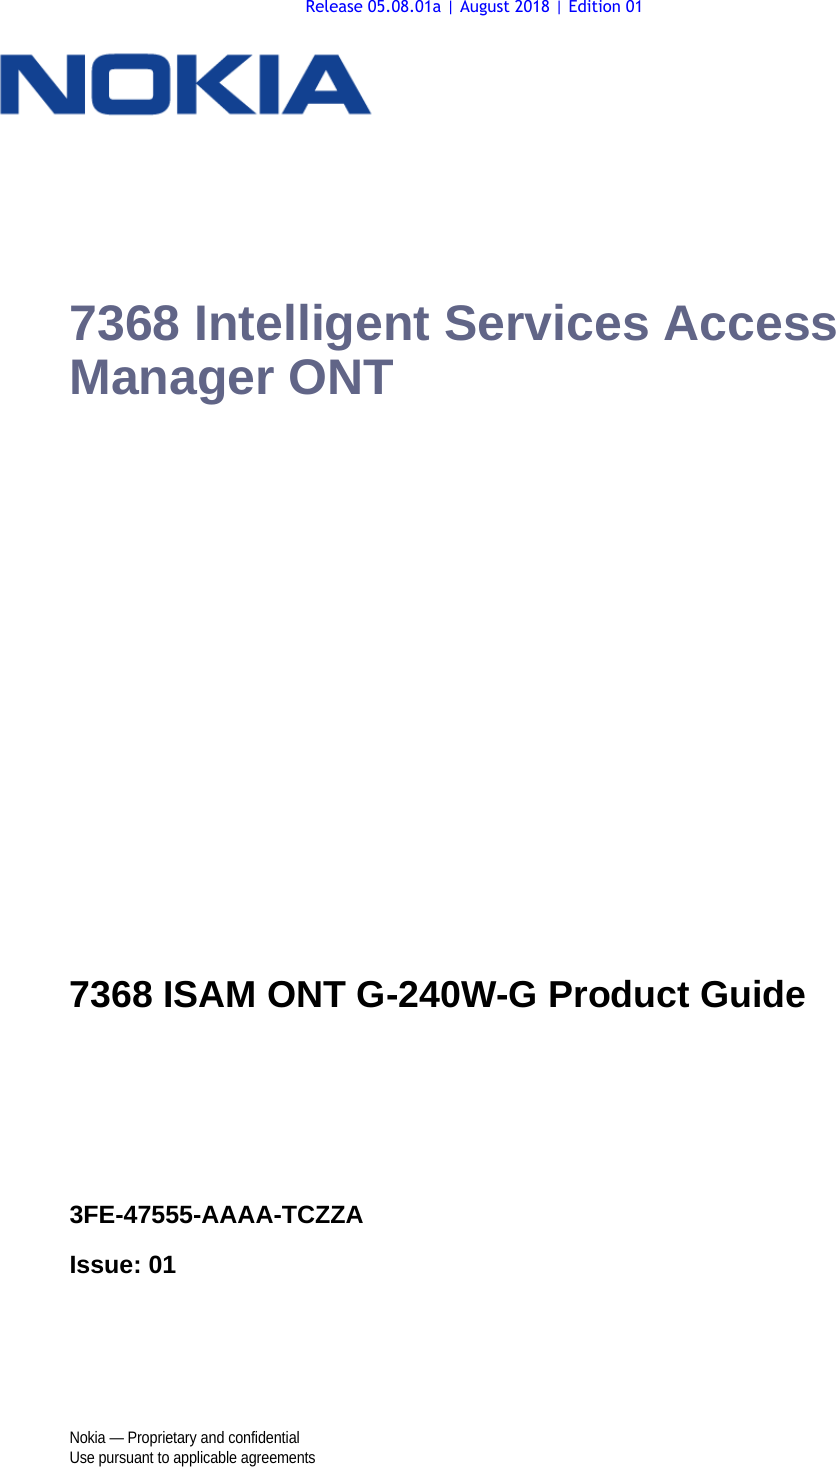 Nokia — Proprietary and confidentialUse pursuant to applicable agreements 7368 Intelligent Services Access Manager ONT7368 ISAM ONT G-240W-G Product Guide3FE-47555-AAAA-TCZZAIssue: 01 7368 ISAM ONT G-240W-G Product GuideRelease 05.08.01a | August 2018 | Edition 01